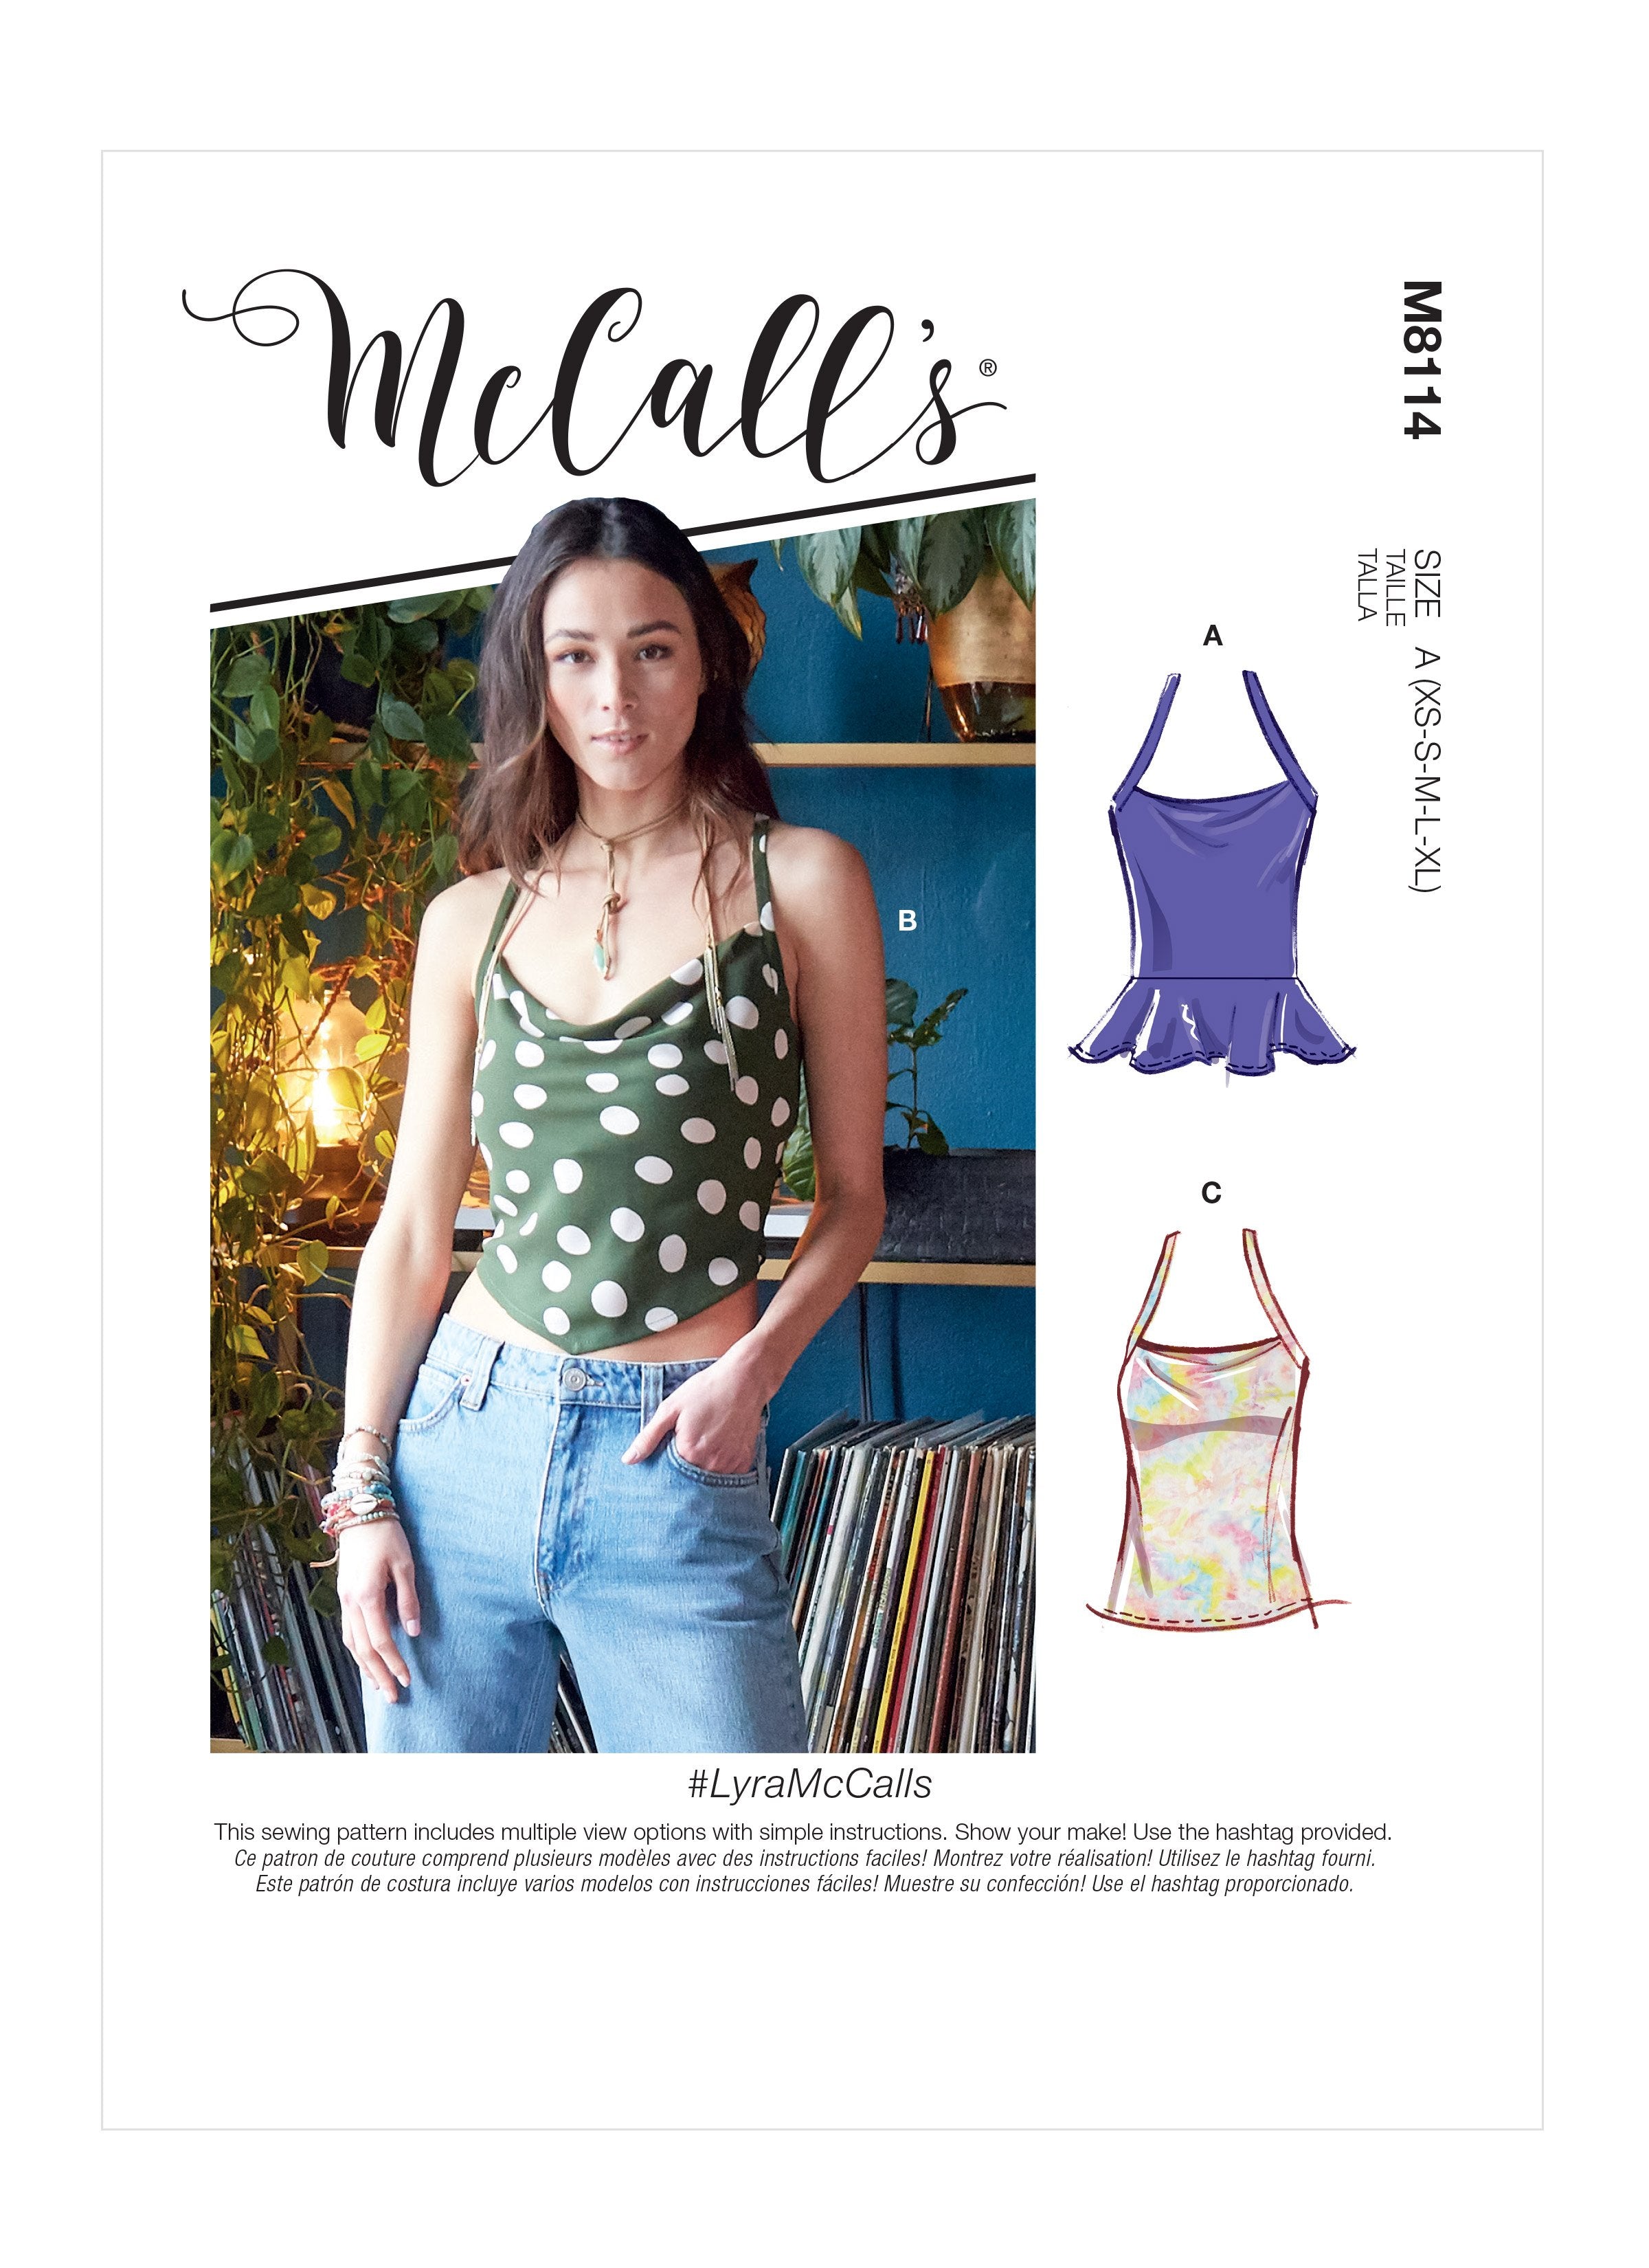 McCall's 8114 Tops sewing pattern #LyraMcCalls from Jaycotts Sewing Supplies